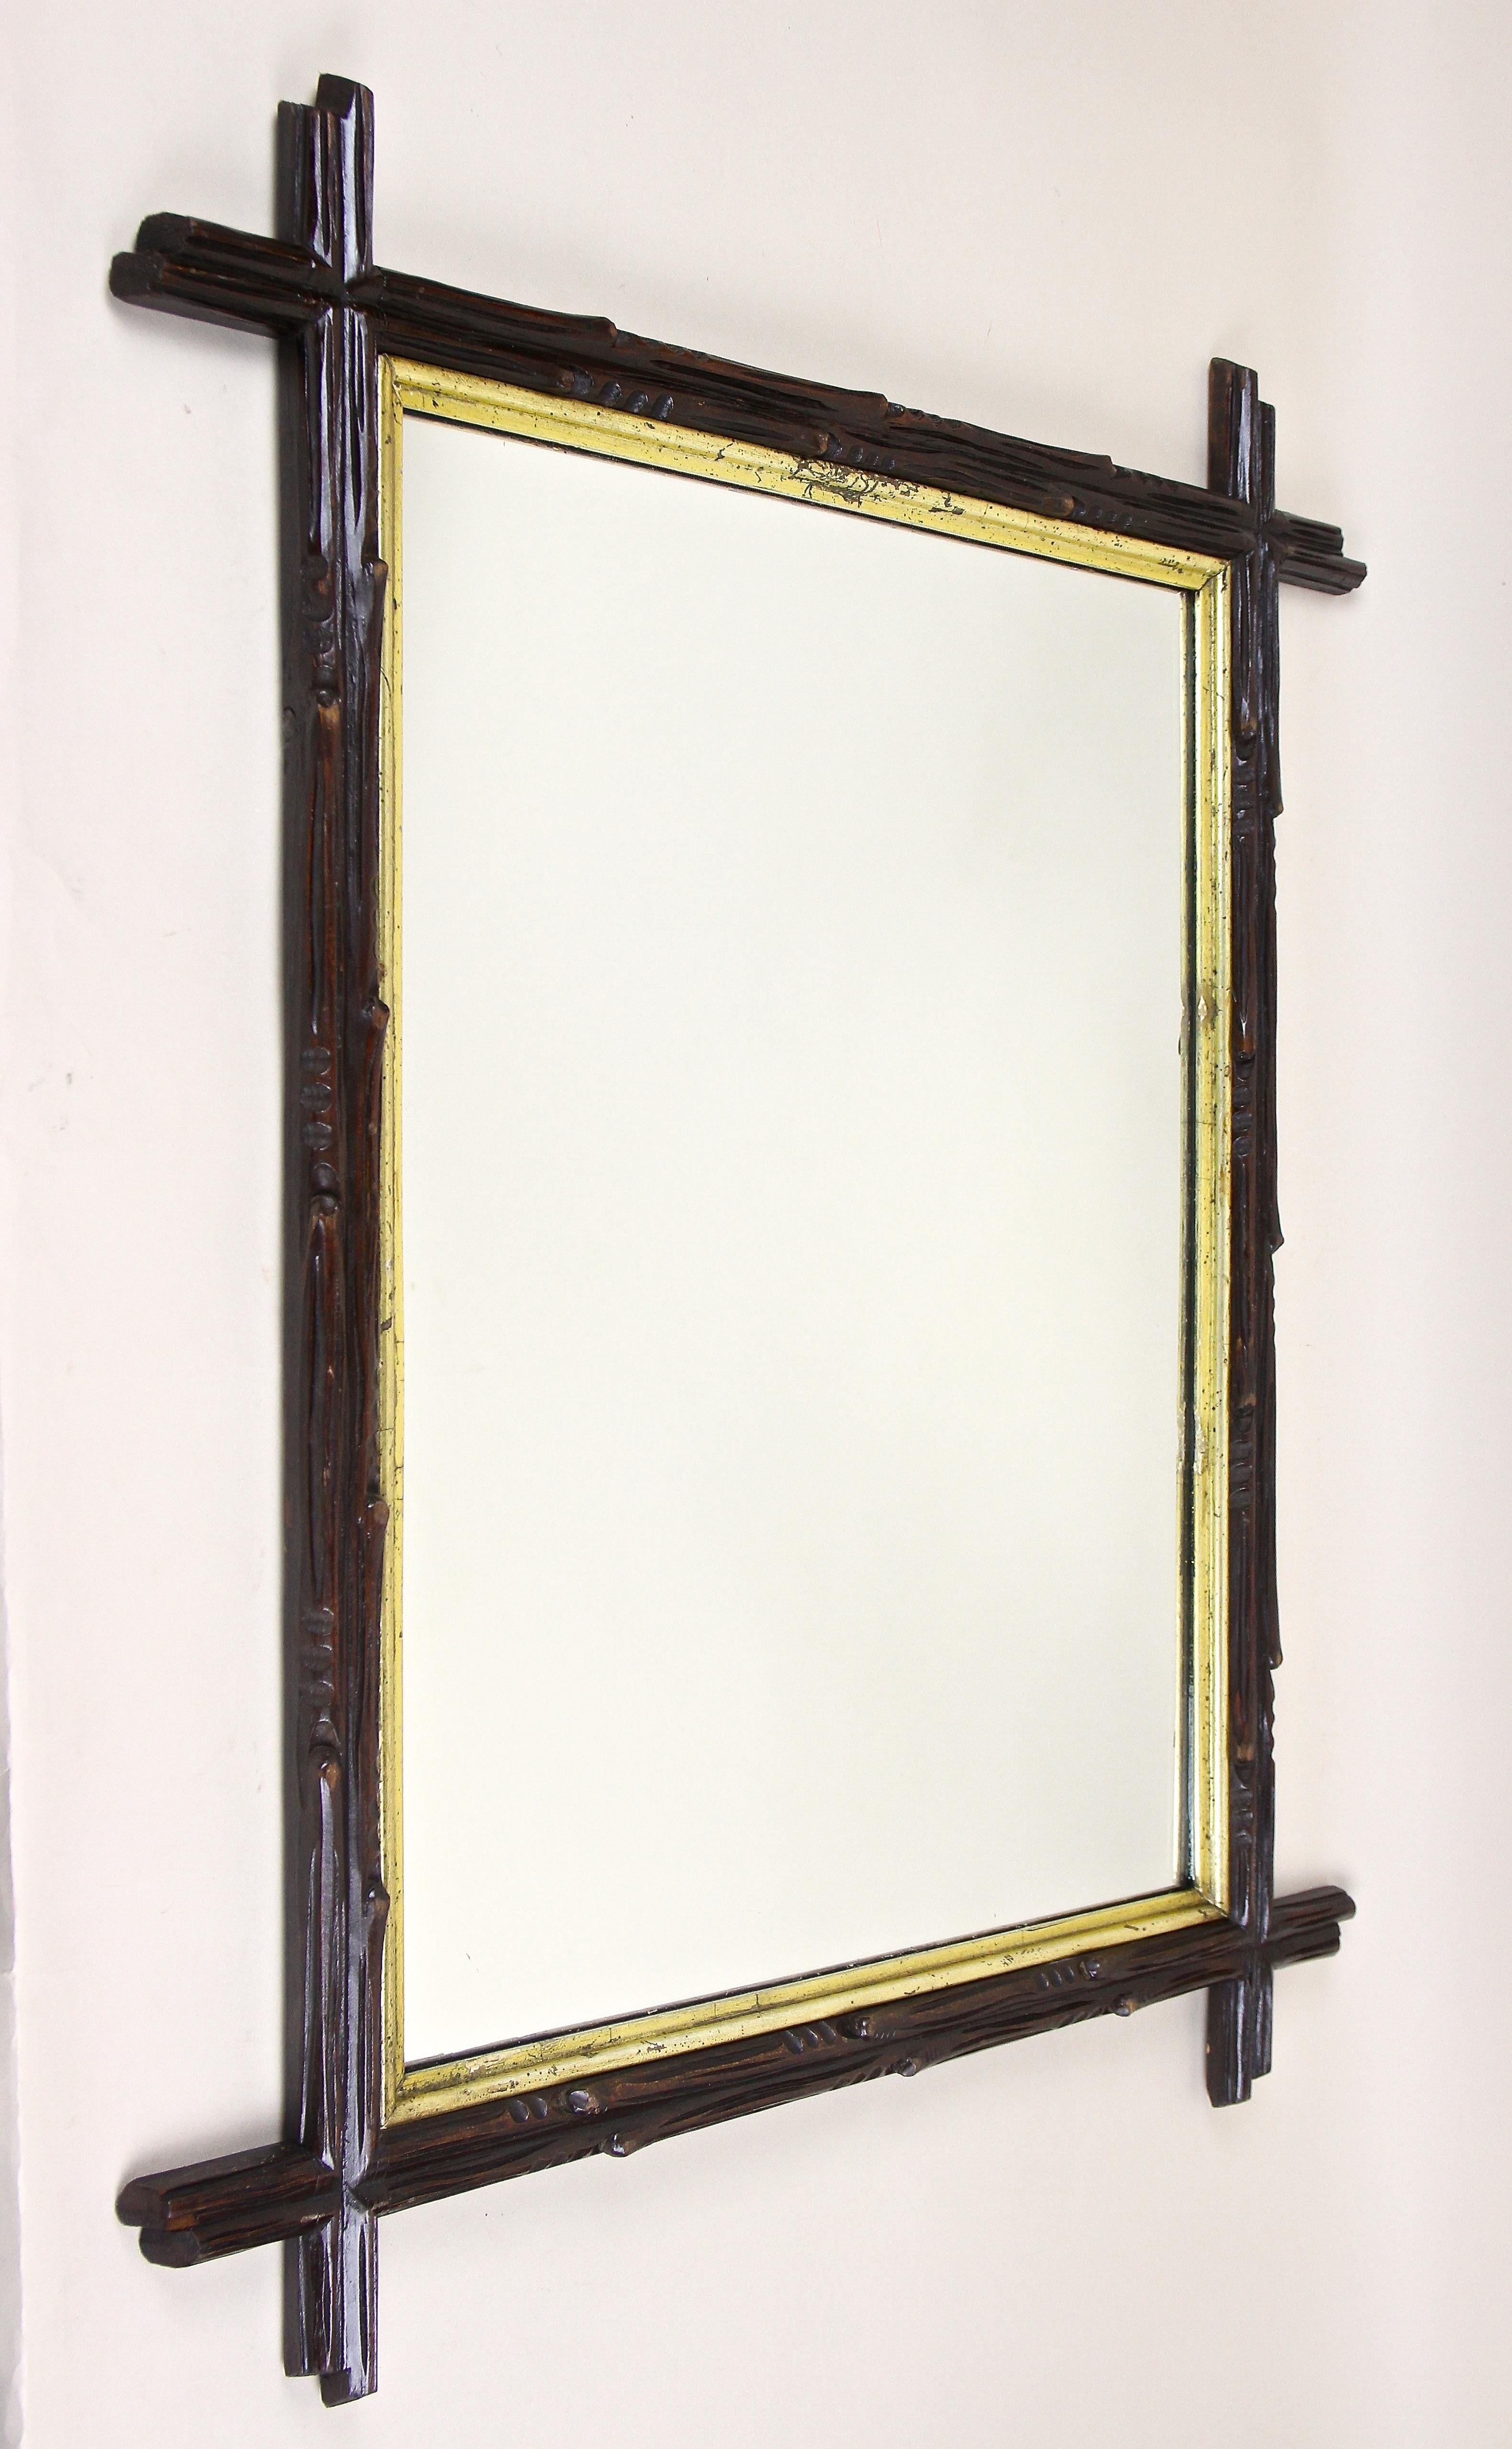 Charming rustic black Forest wall mirror from the period in Austria around 1880. Artfully hand carved out of basswood, this exceptional rural mirror impresses with its gorgeous carved frame in the style of tree branches, slightly protruding corners